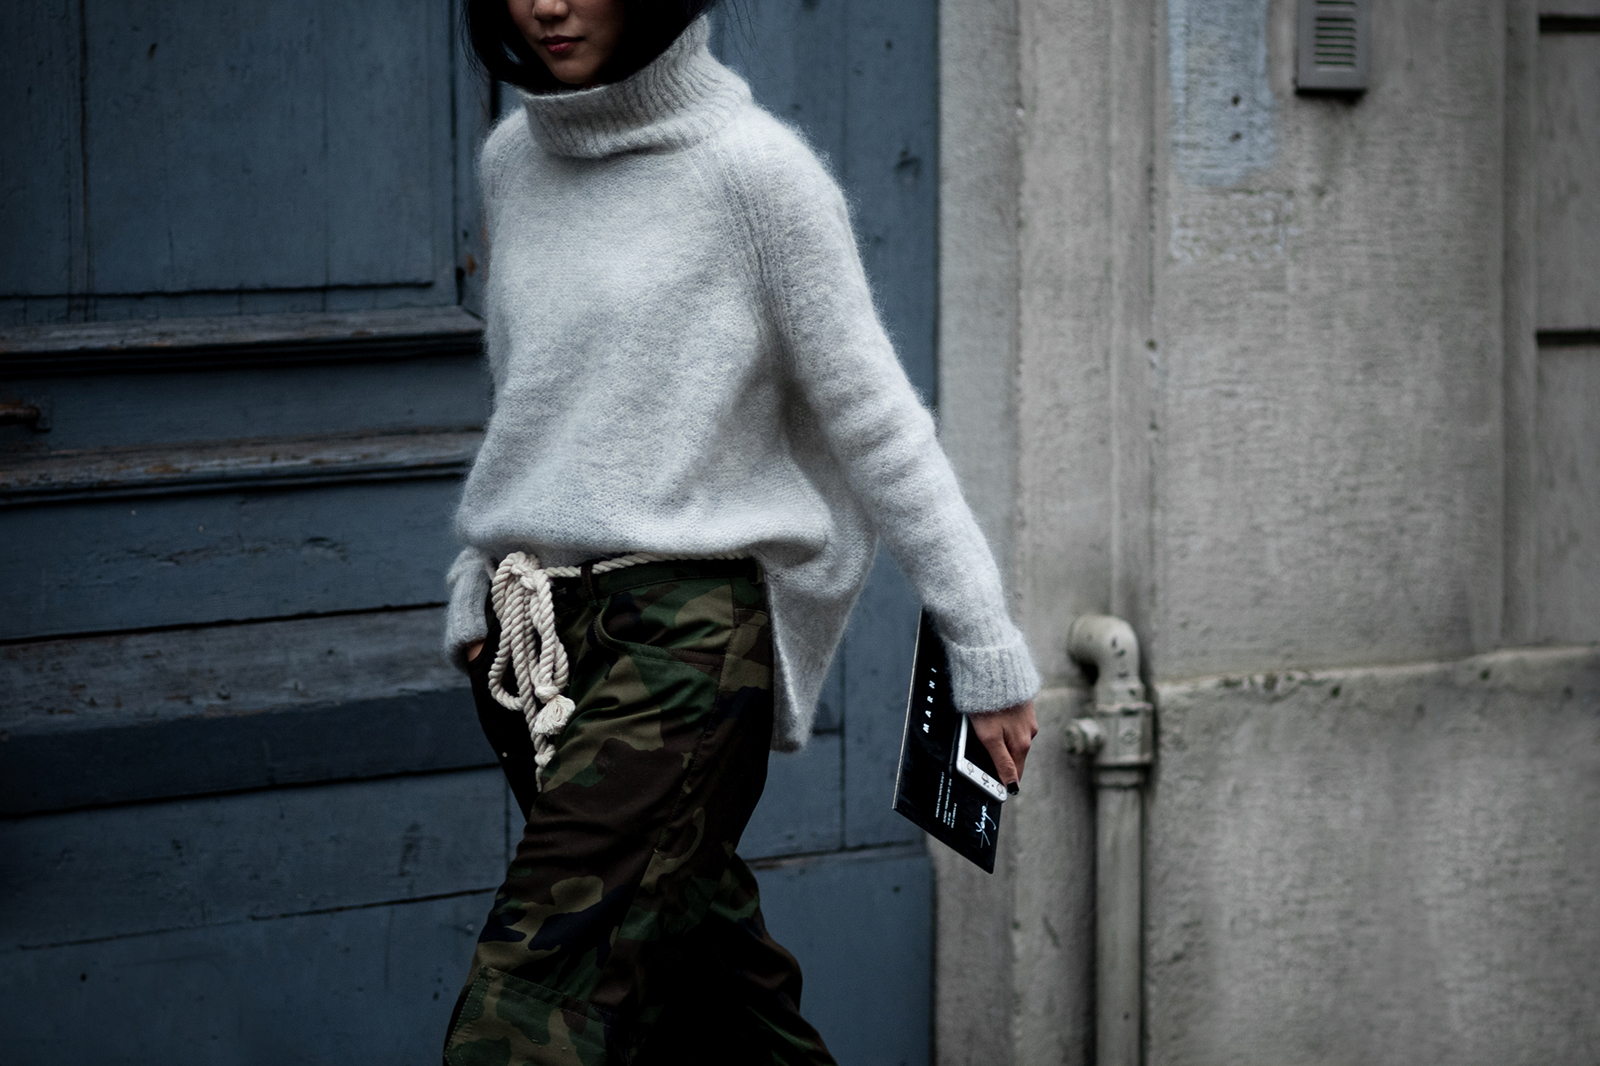 Yoyo Cao wearing a grey sweater and camo pants after the Marni Fashion Show in Milan, Italy